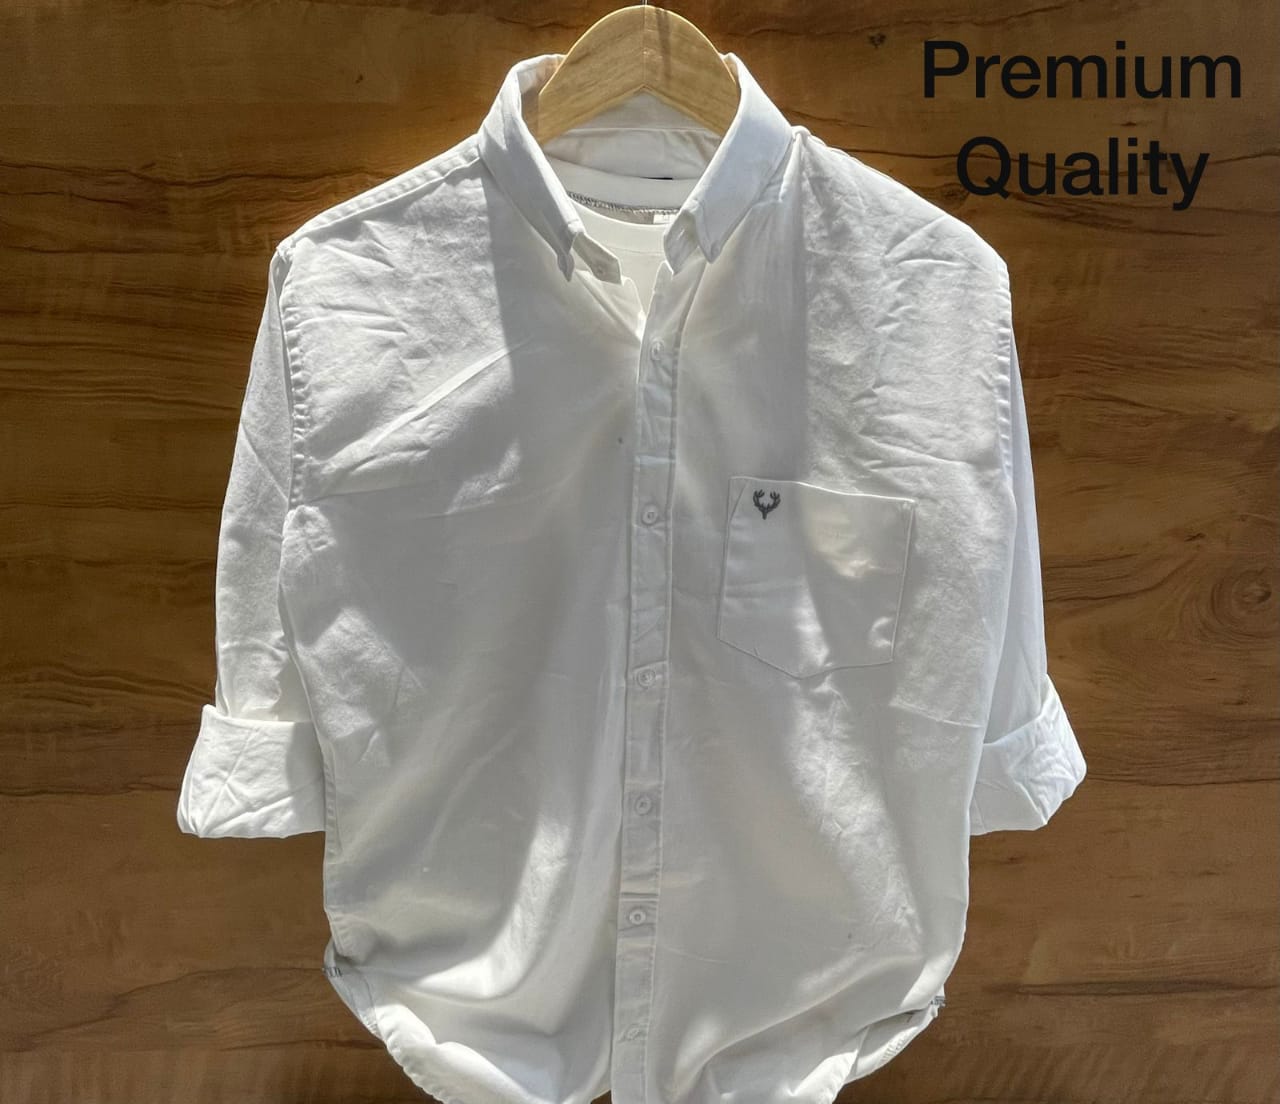 Details View - ALLEN SOLLY SHIRT photos - reseller,reseller marketplace,advetising your products,reseller bazzar,resellerbazzar.in,india's classified site,ALLEN SOLLY shirt, ALLEN SOLLY shirt in New Mexico, ALLEN SOLLY  shirt in USA